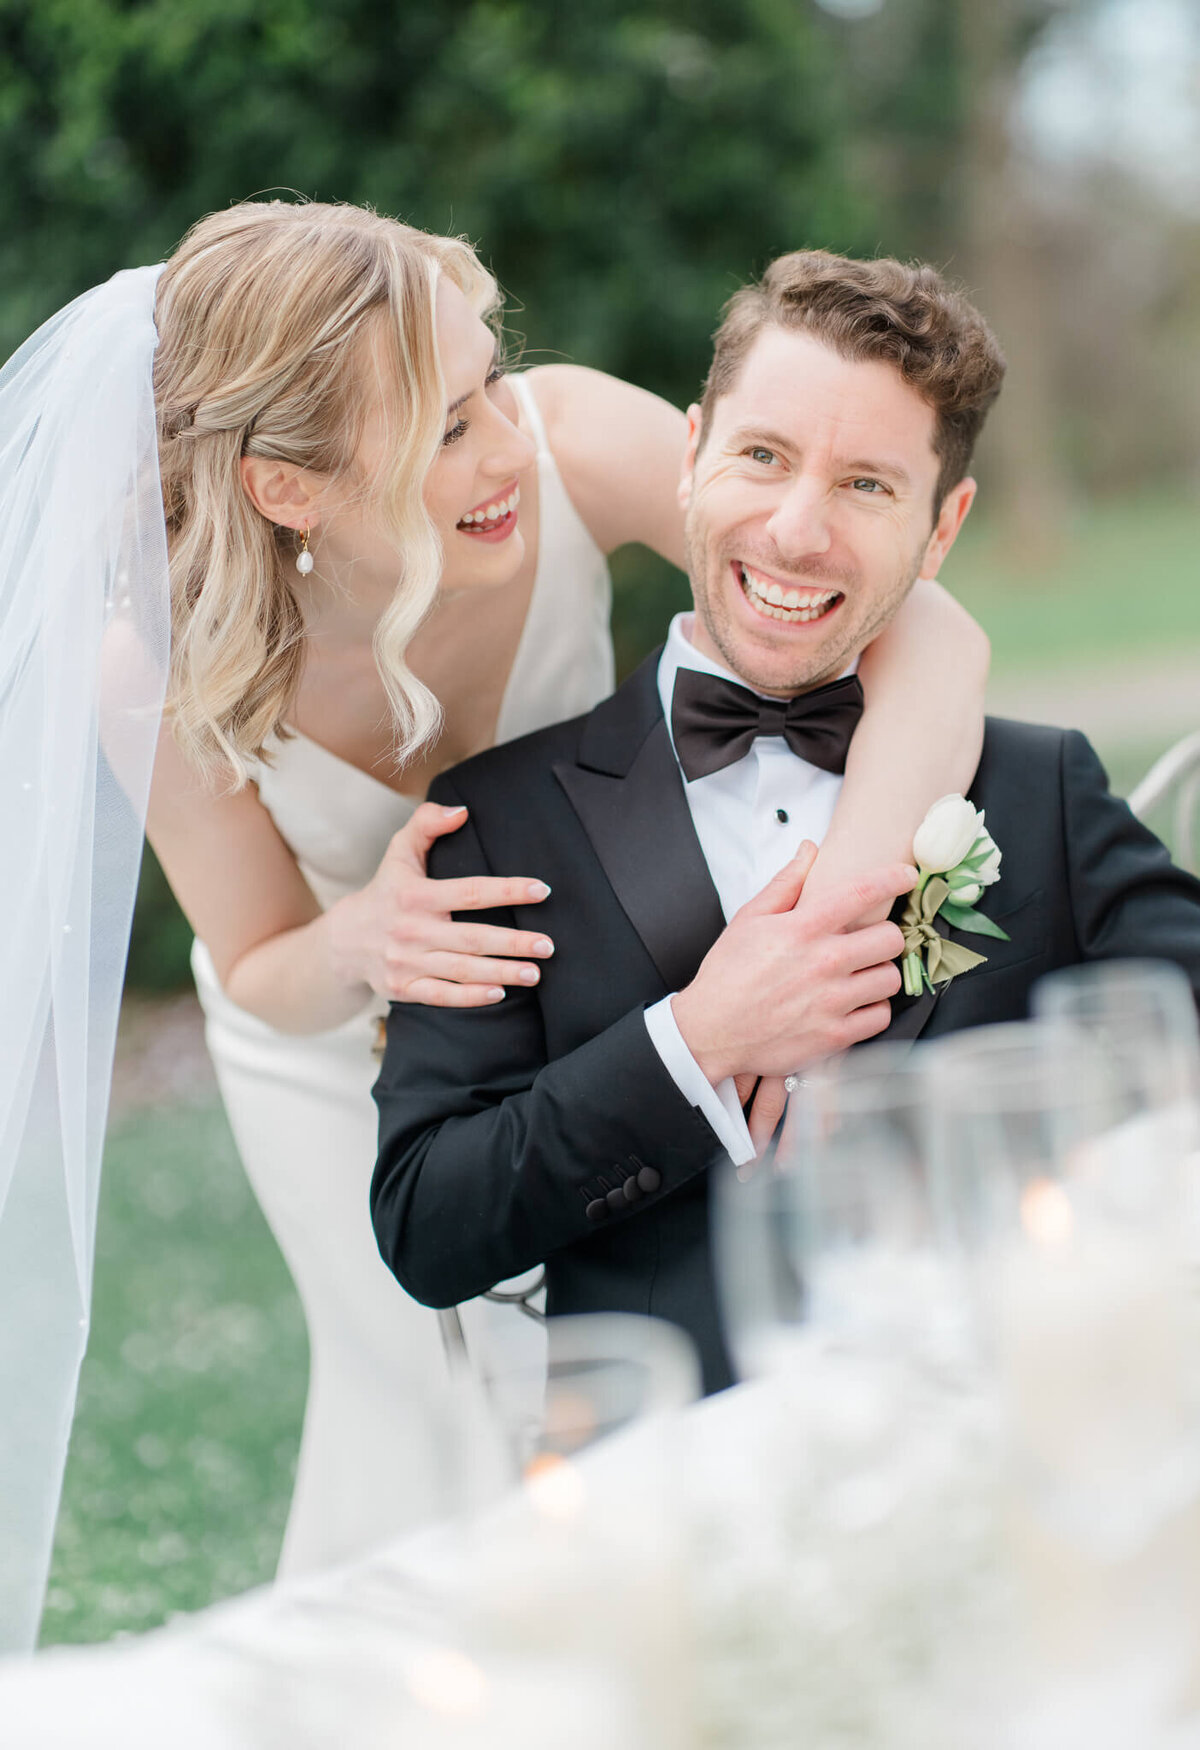 Bride and Groom at their reception at Market at Grelen in Somerset, Virginia. Captured by Charlottesville Wedding Photographer Bethany Aubre Photography.